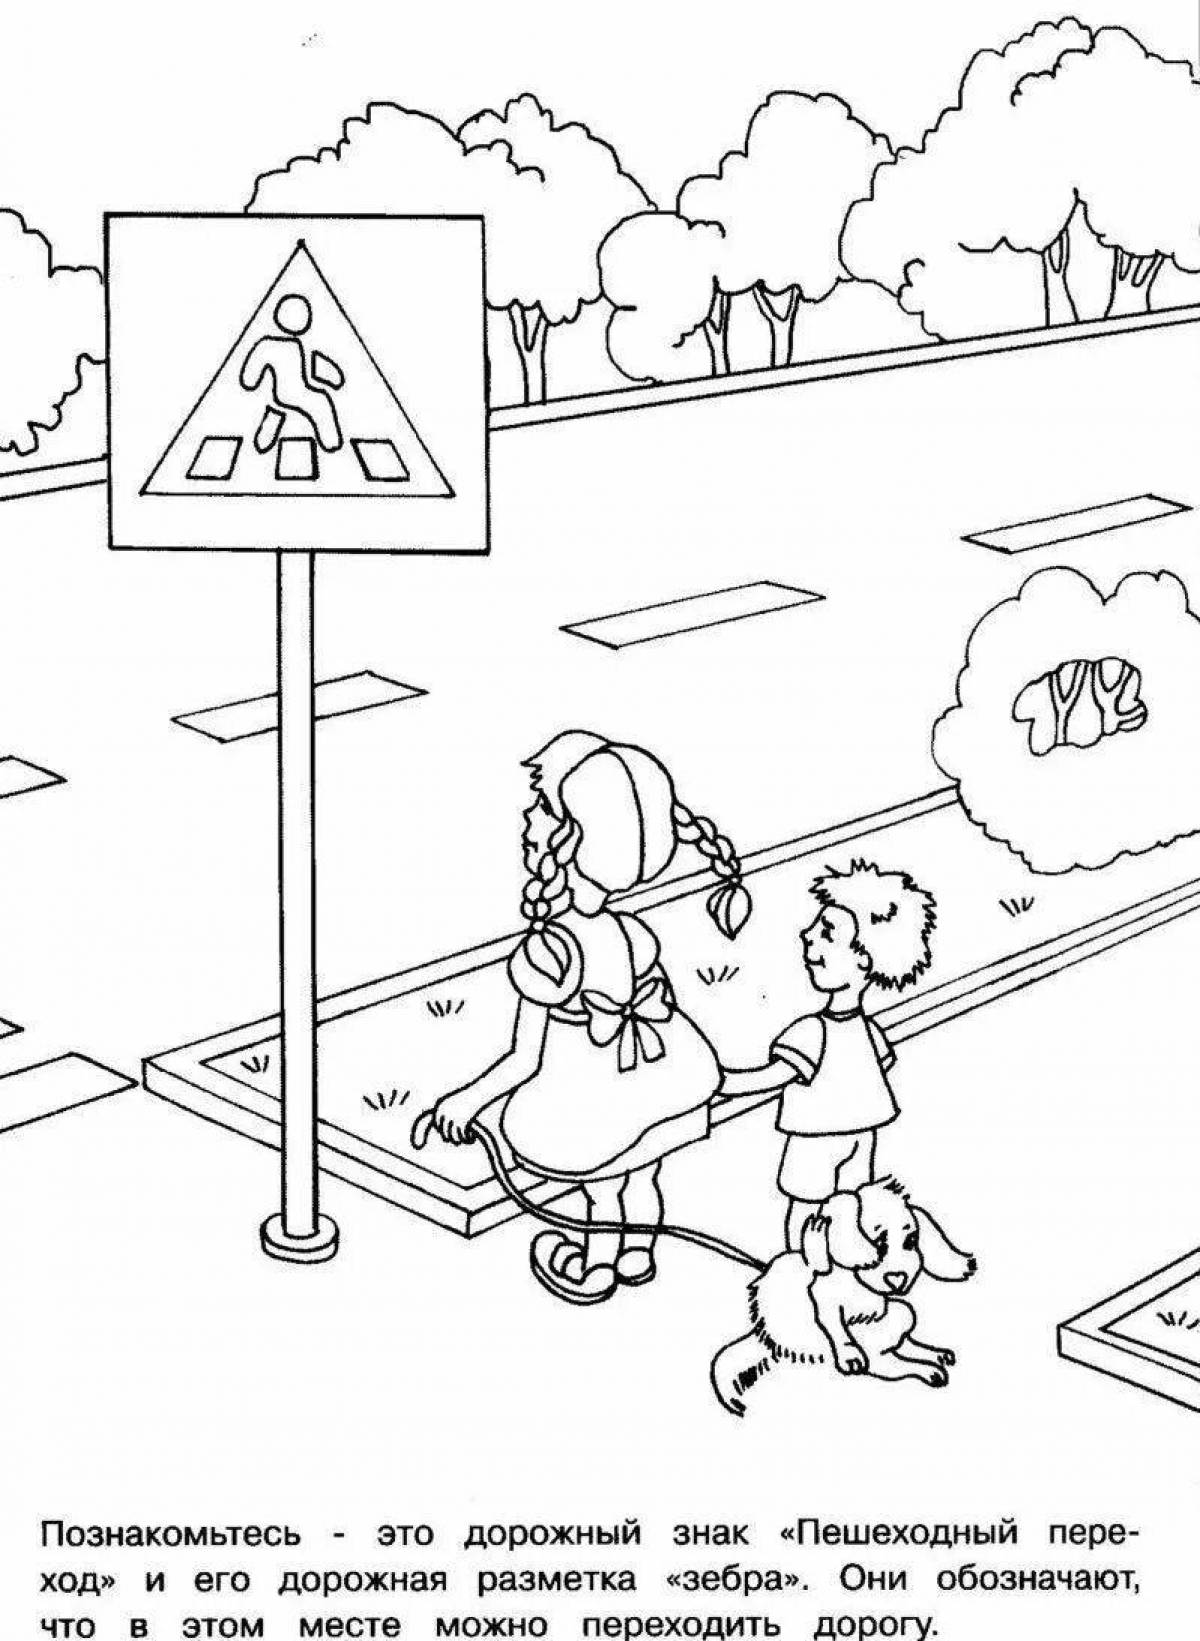 Coloring page pleasant safety on the road